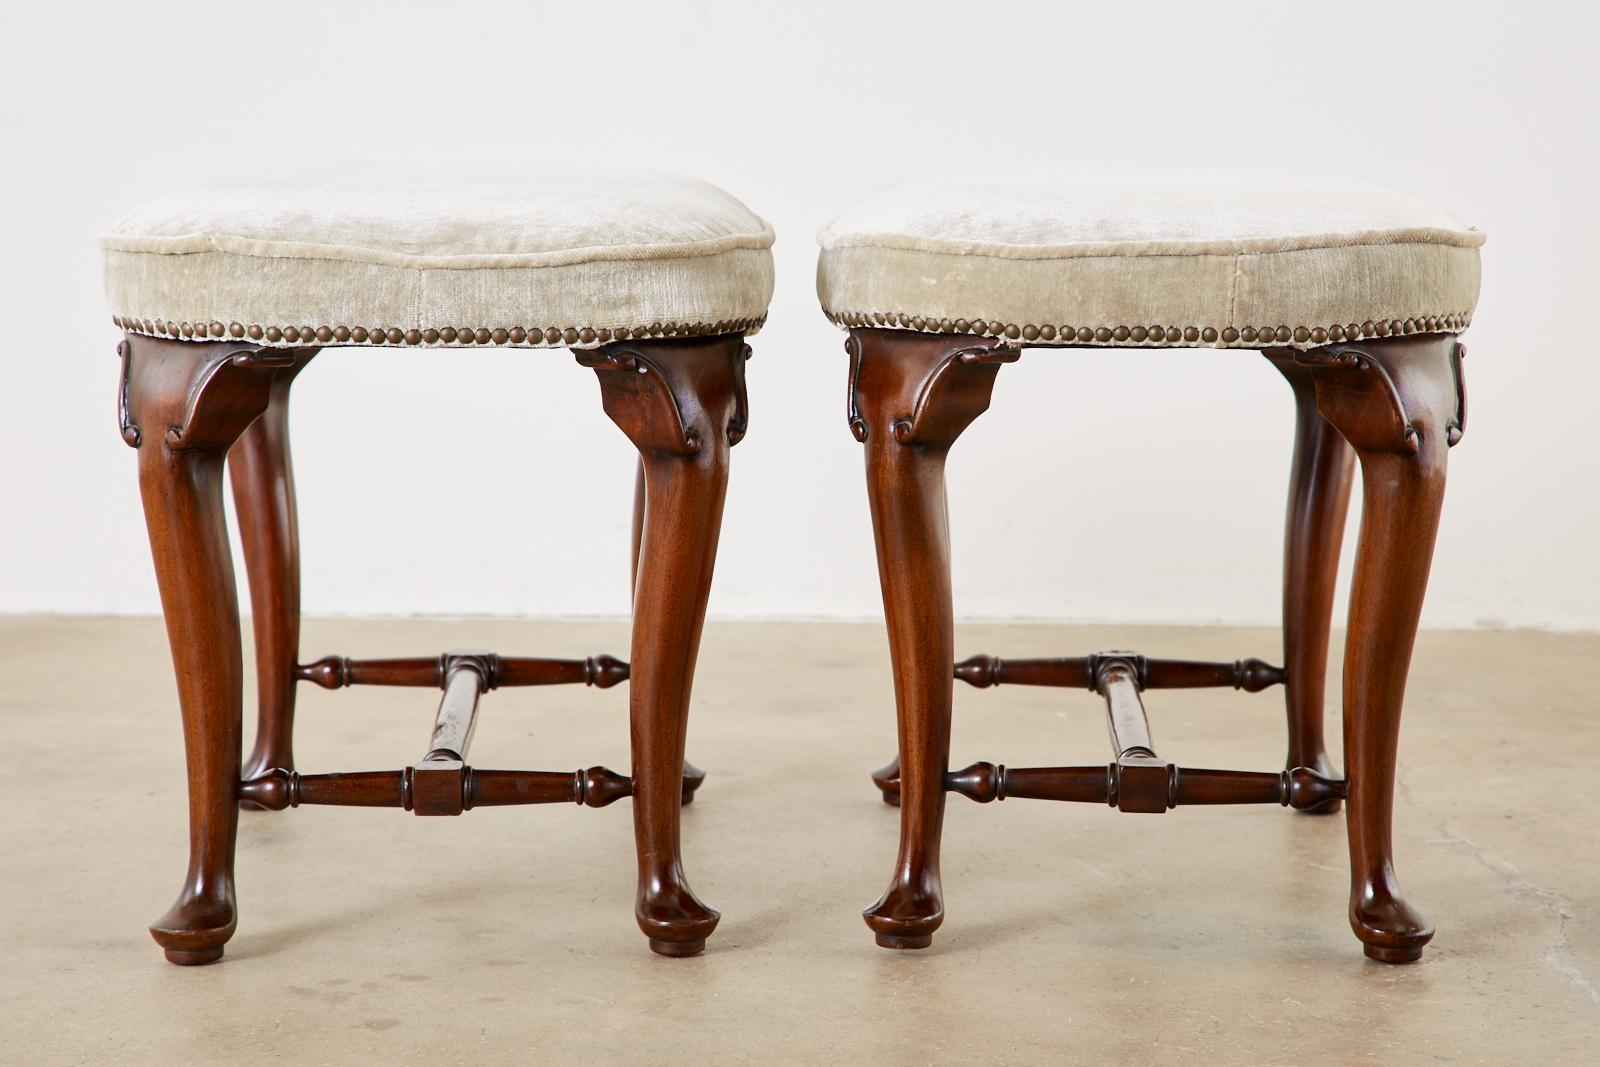 19th century matching pair of mahogany footstools made in the Queen Anne taste. Featuring plush, velvet upholstery bordered by brass tack nail heads. Supported by cabriole legs ending with pad feet conjoined by turned stretchers. From an estate in